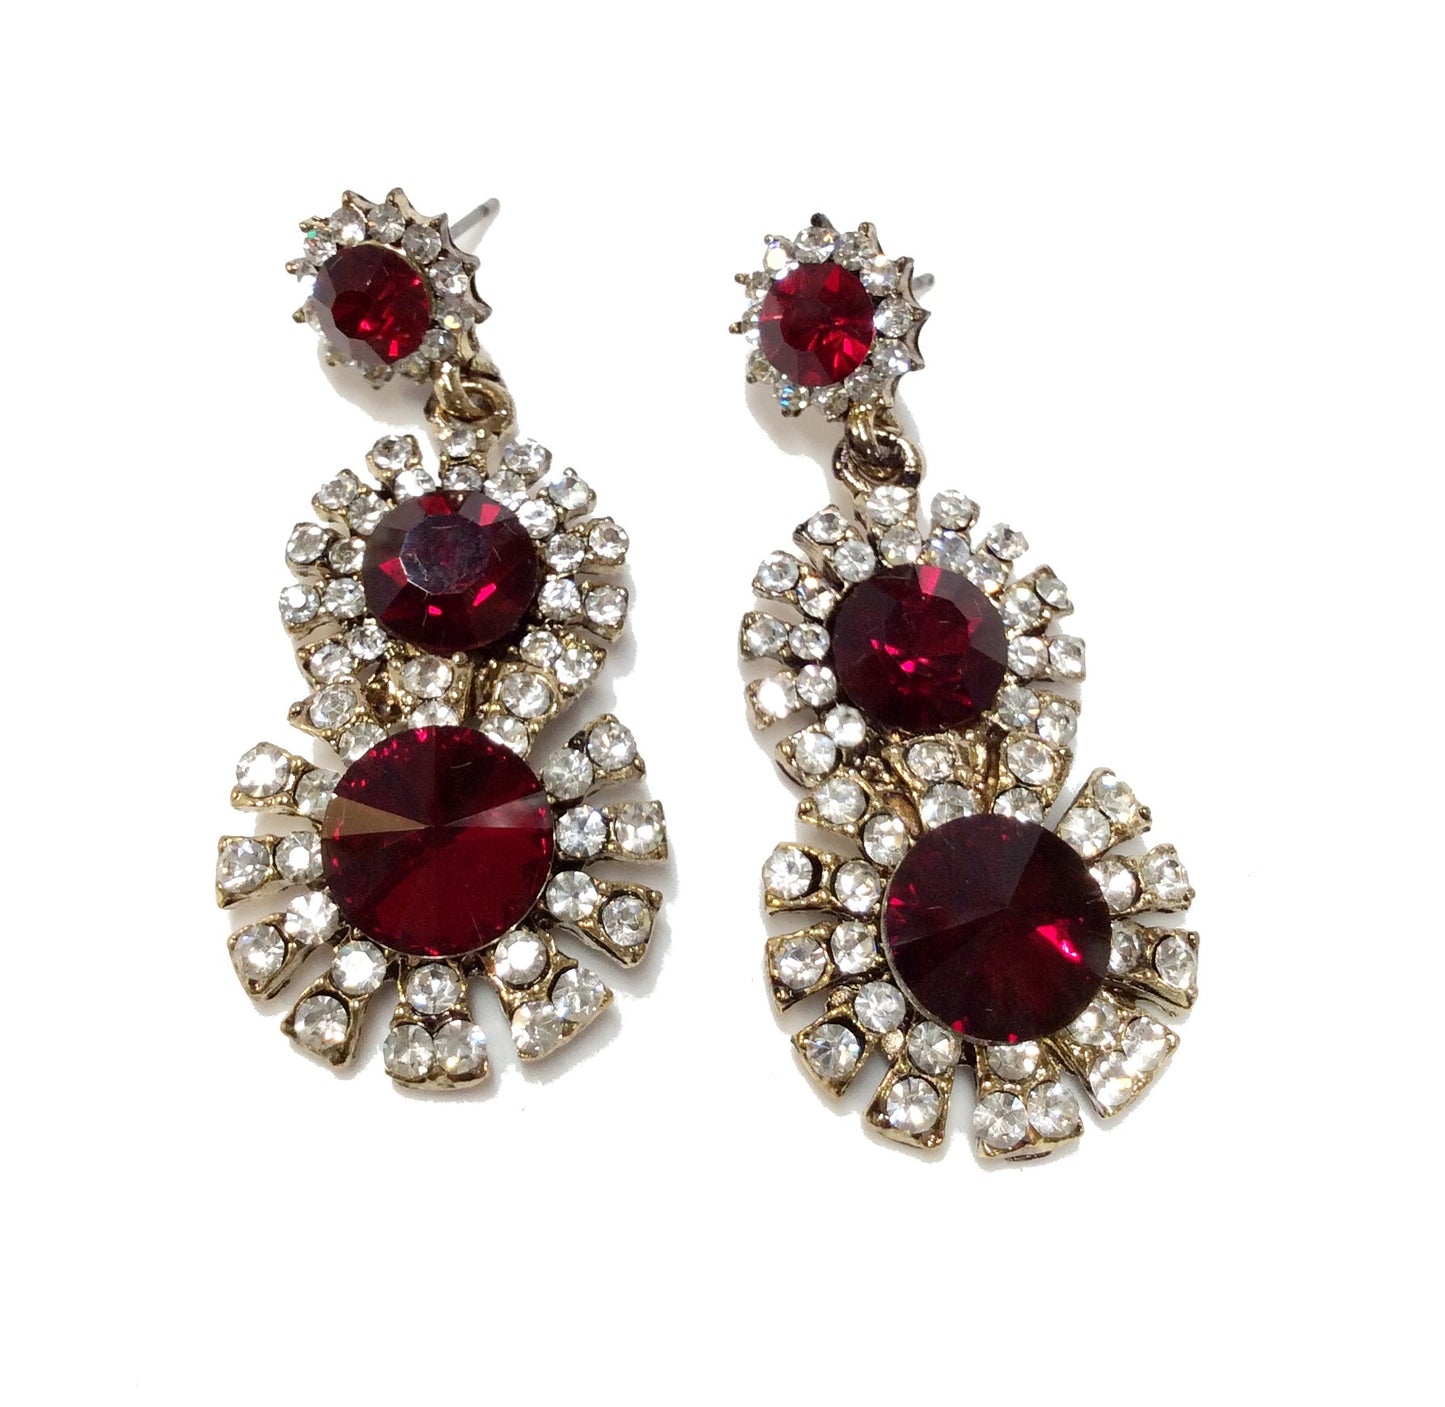 Red Round Earring #12-23632